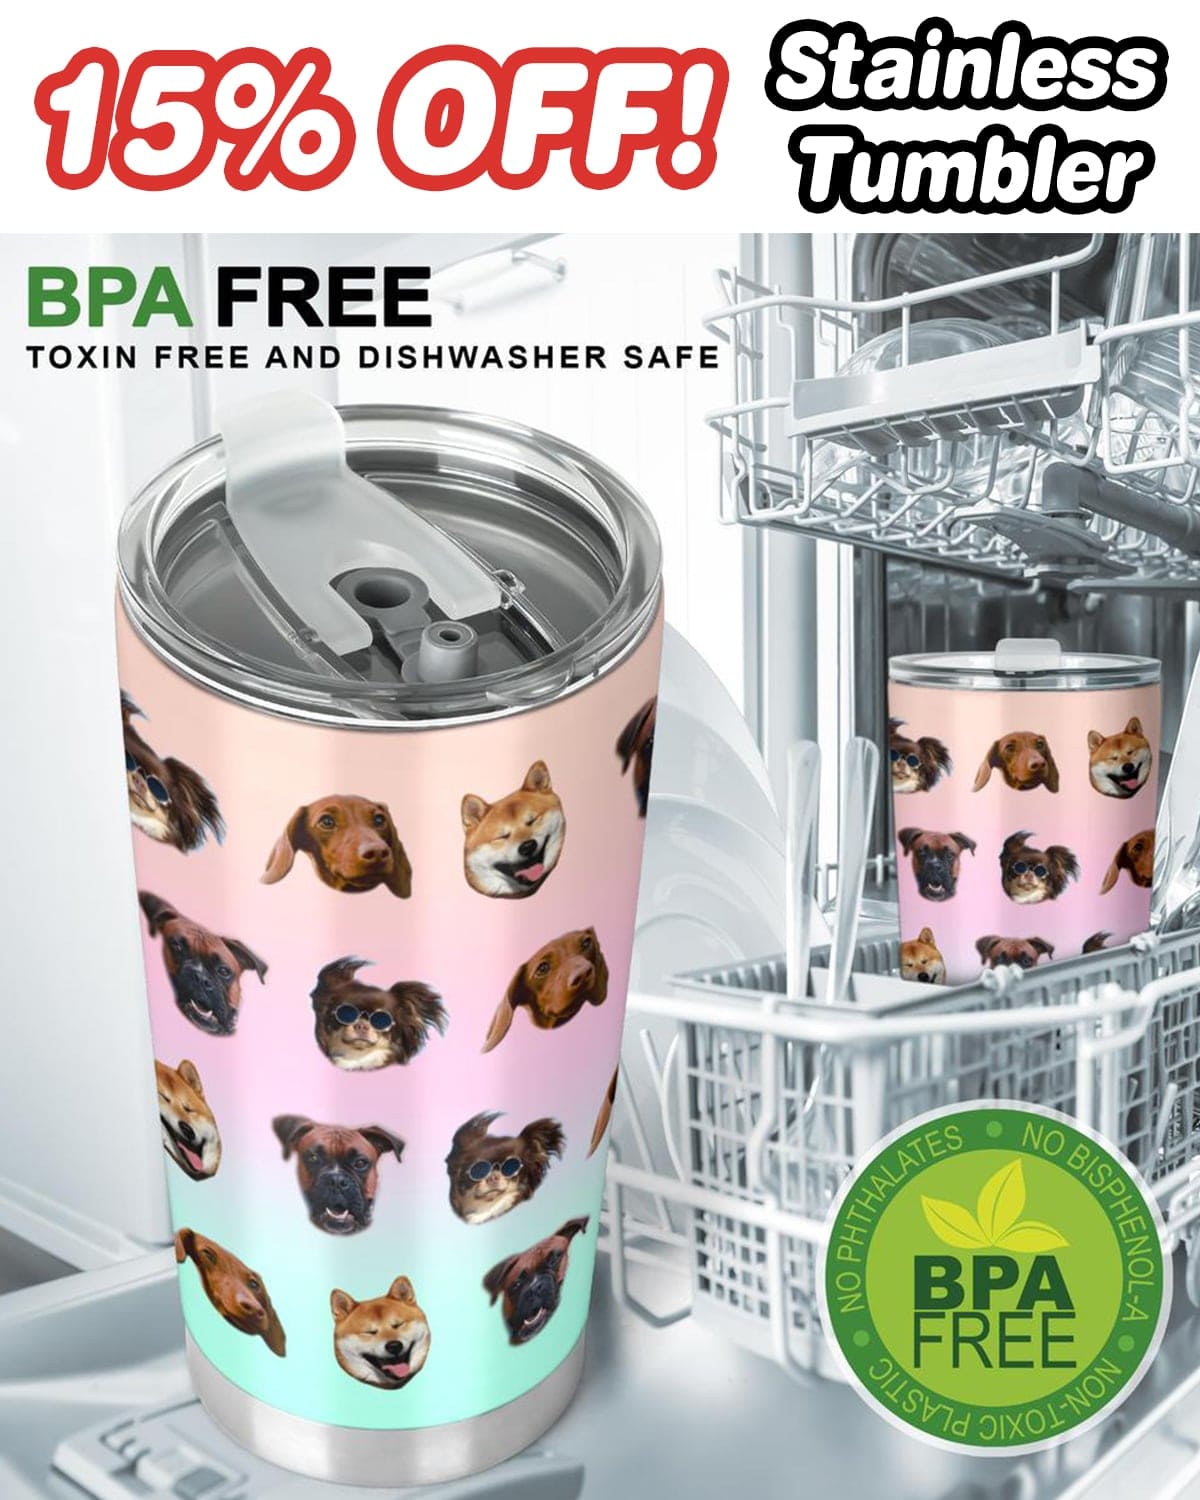 Stainless Tumbler (with the same photos you uploaded)